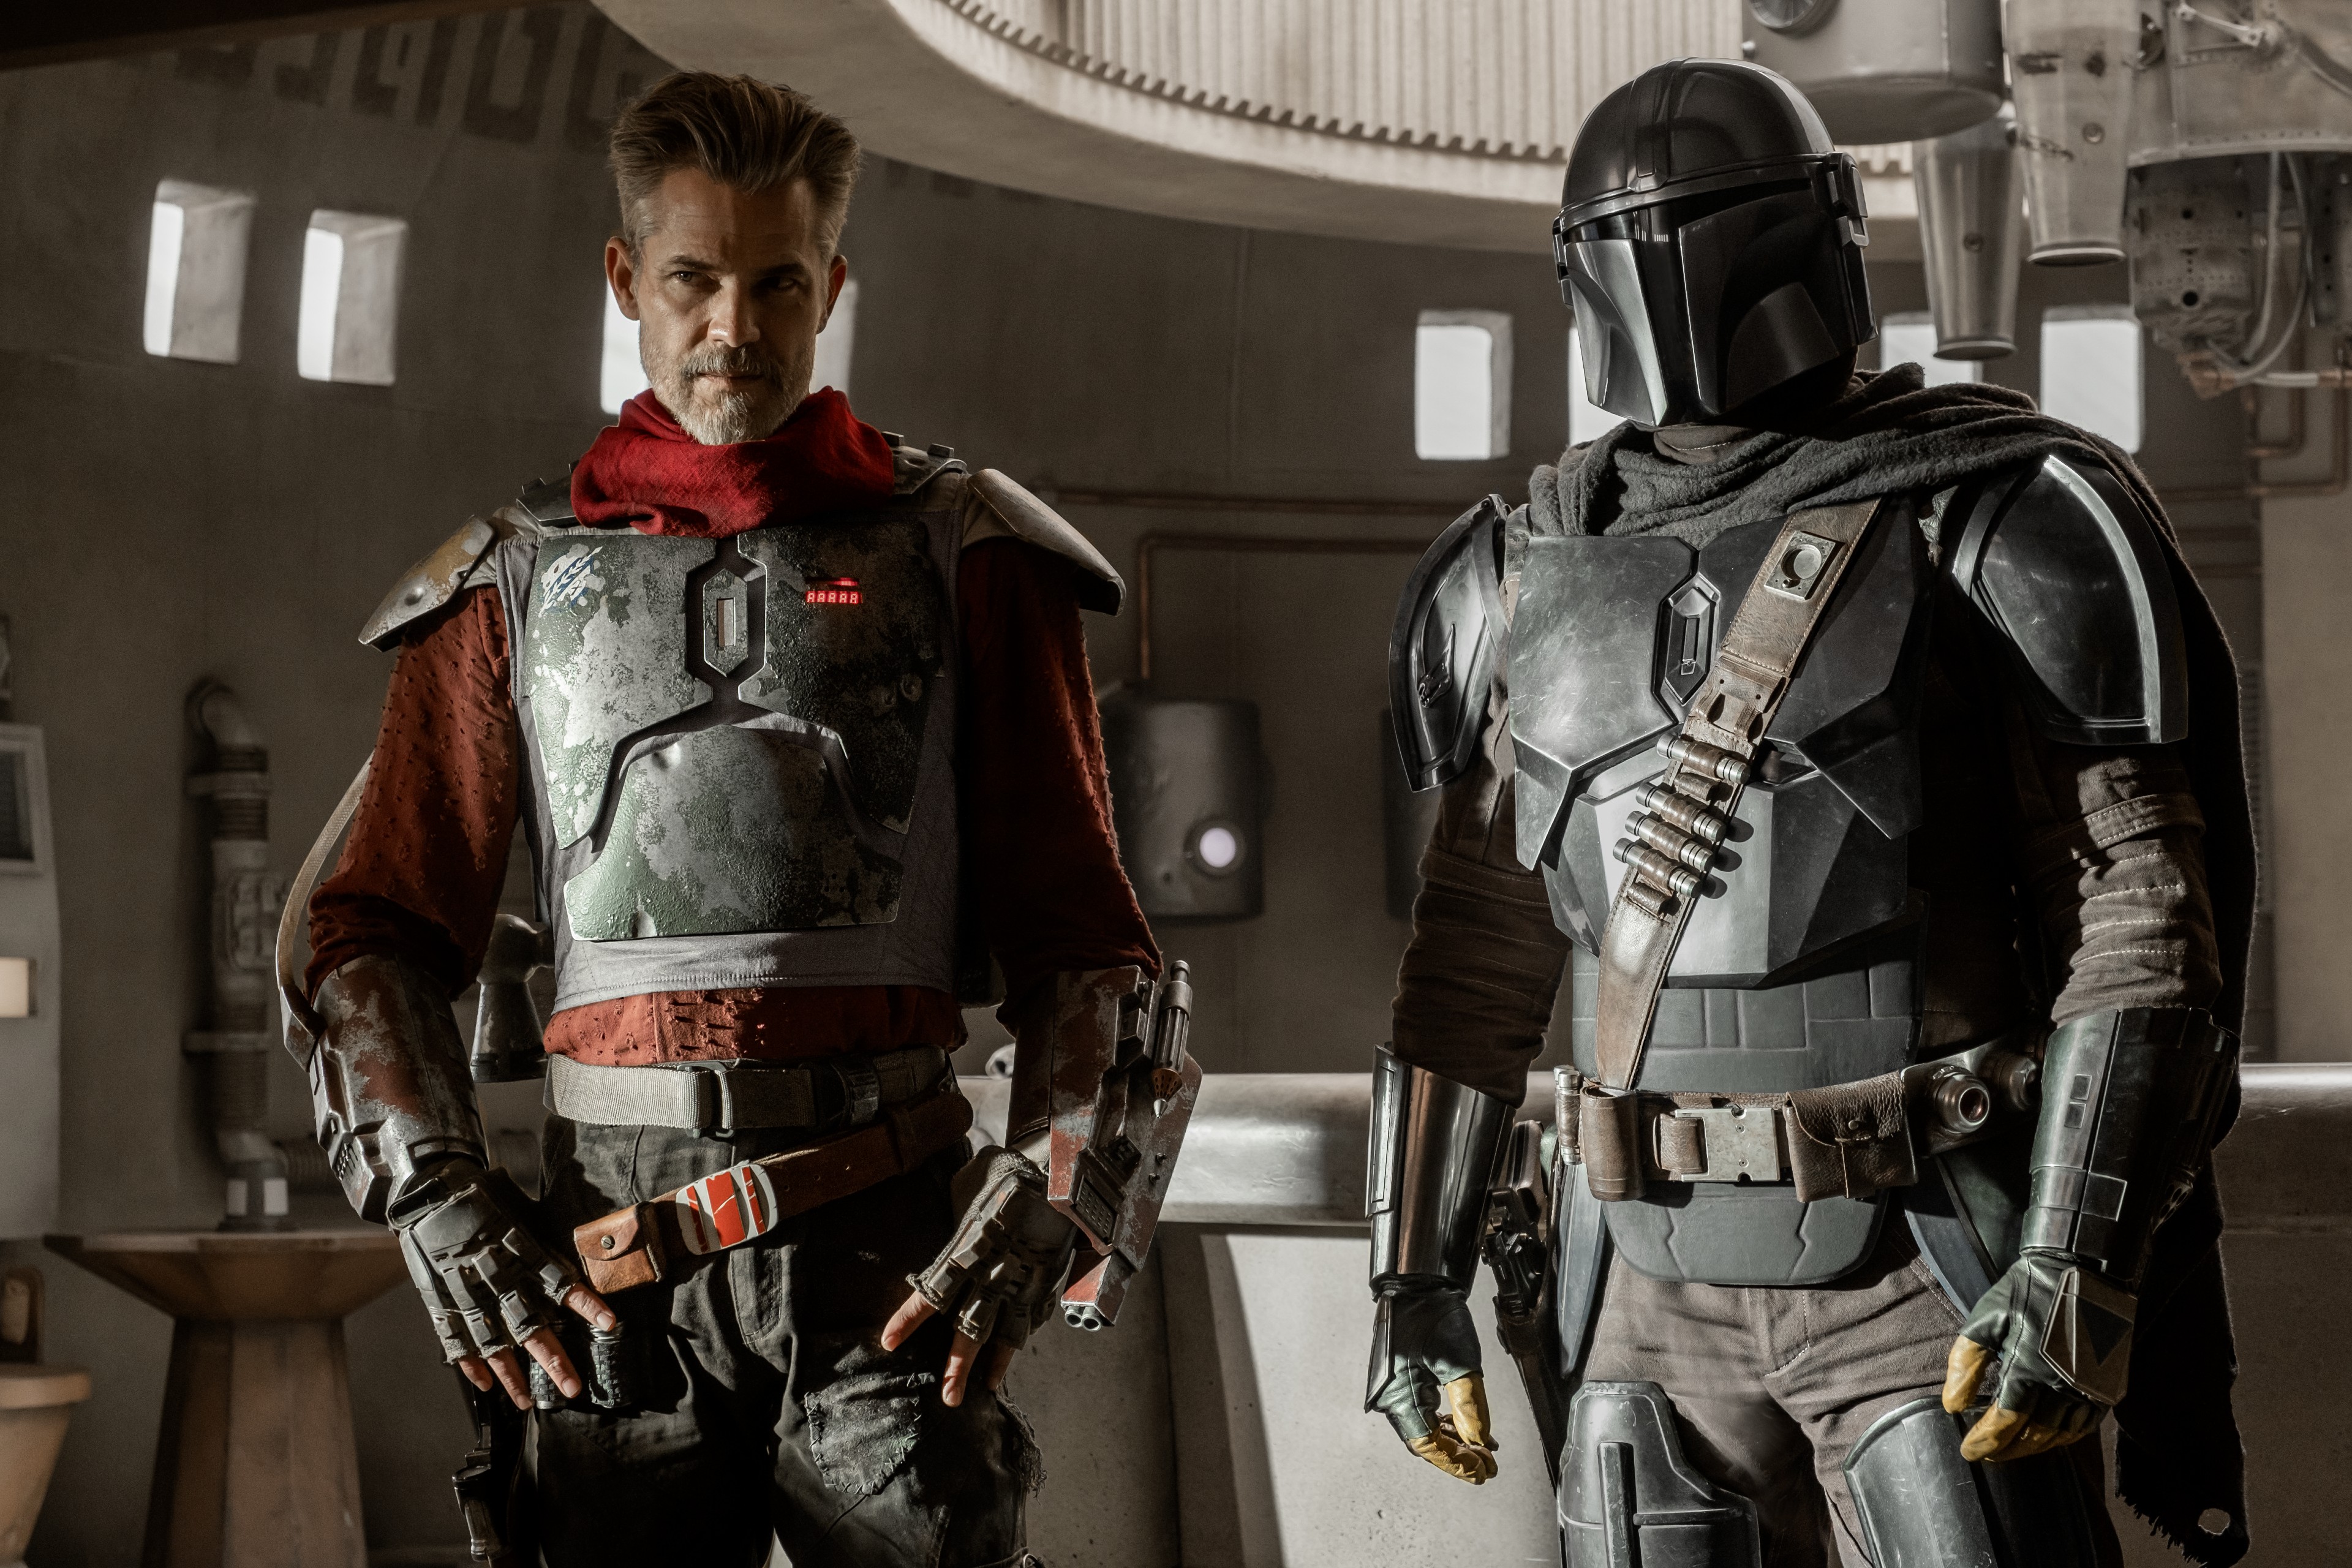 Make Your Own: The Mandalorian | Carbon Costume | DIY Guides to Dress Up  for Cosplay & Halloween